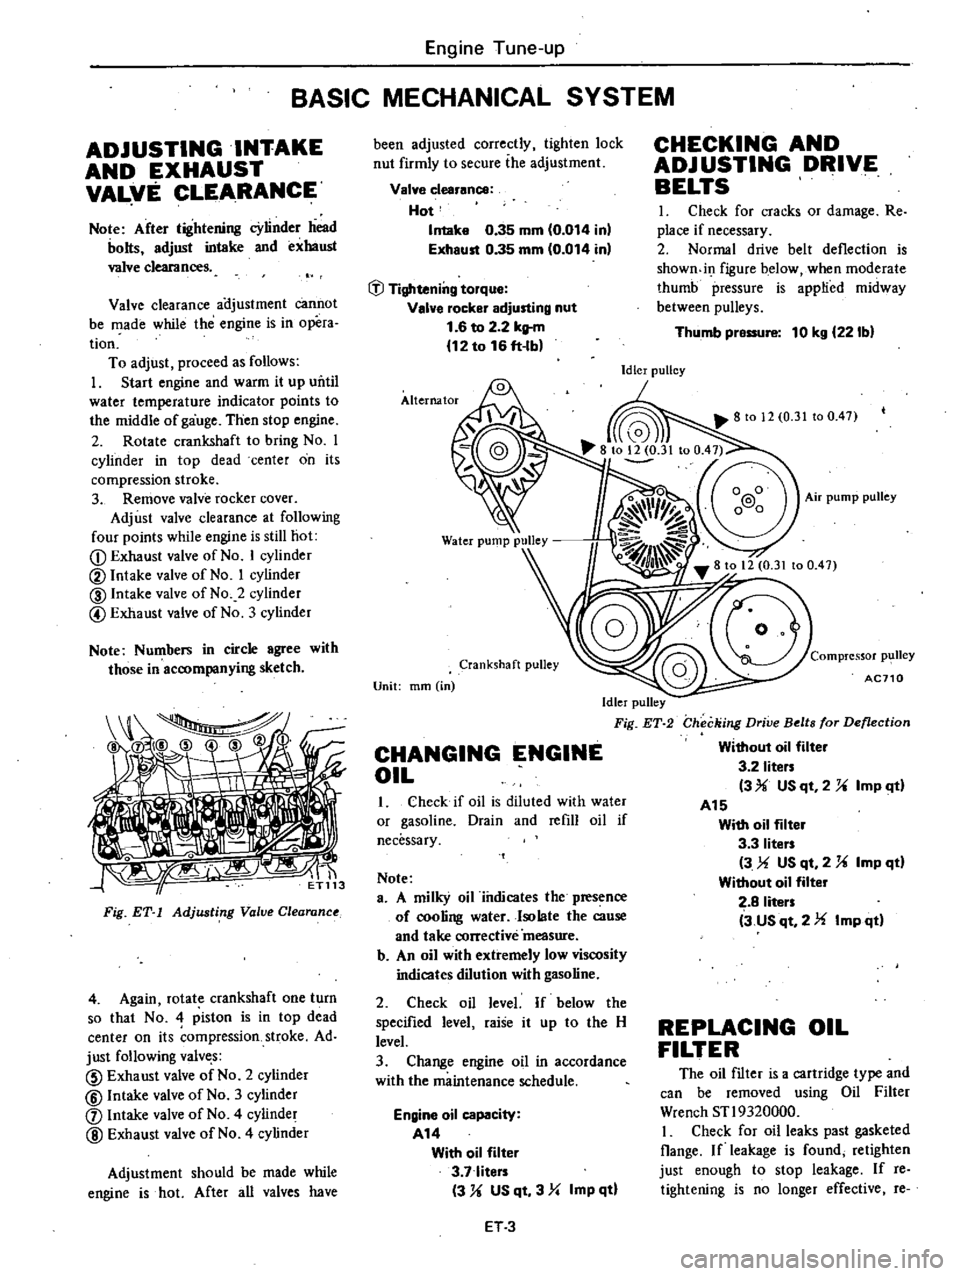 DATSUN 210 1979 User Guide 
Engine 
Tune

up

BASIC 
MECHANICAL 
SYSTEM

ADJUSTING 
INTAKE

AND 
EXHAUST

VAL
fE 
CLEARANCE

Note 
After

tightening 
cYlinder 
head

bolts

adjust 
intake 
and 
exhaust

valve

clearances

Valve